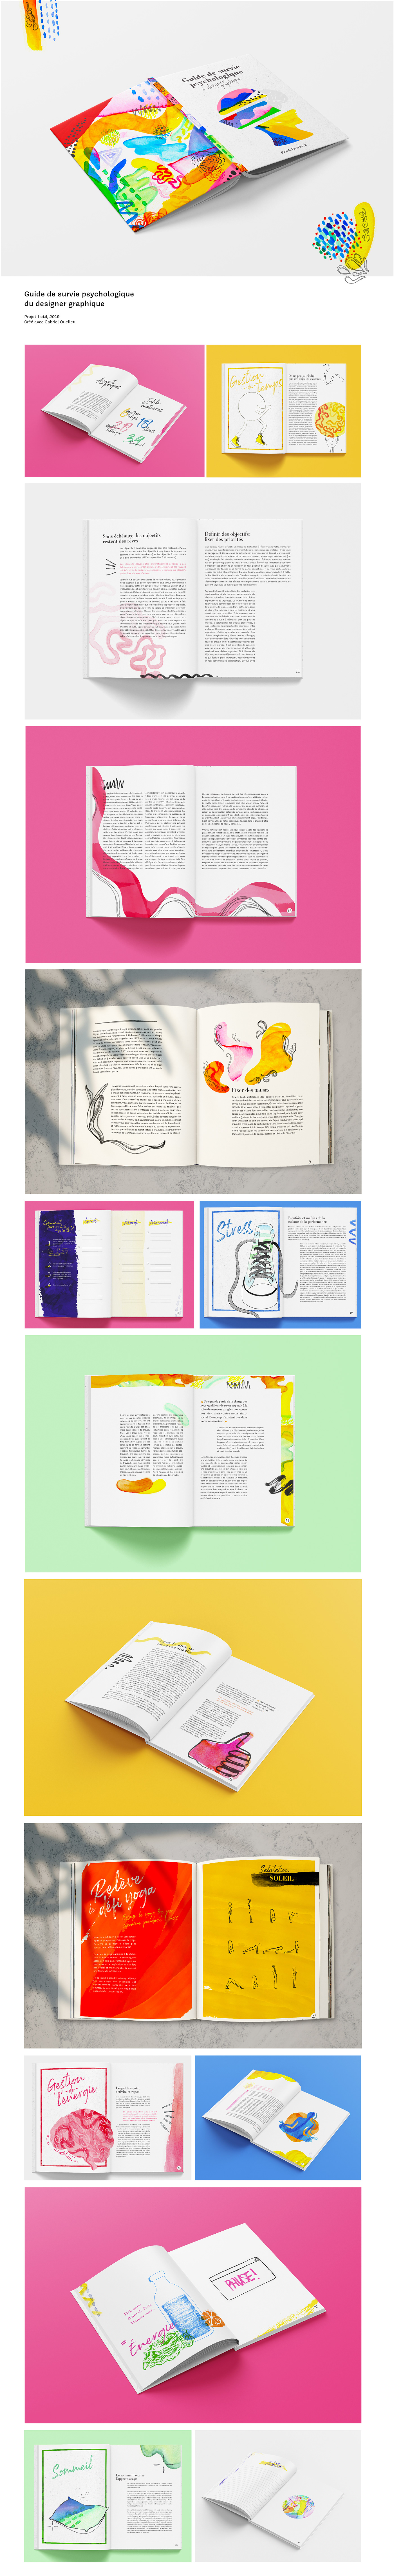 book Bullet Journal edition graphic design  ILLUSTRATION  paint scrapbook sketch wellbeing Yoga